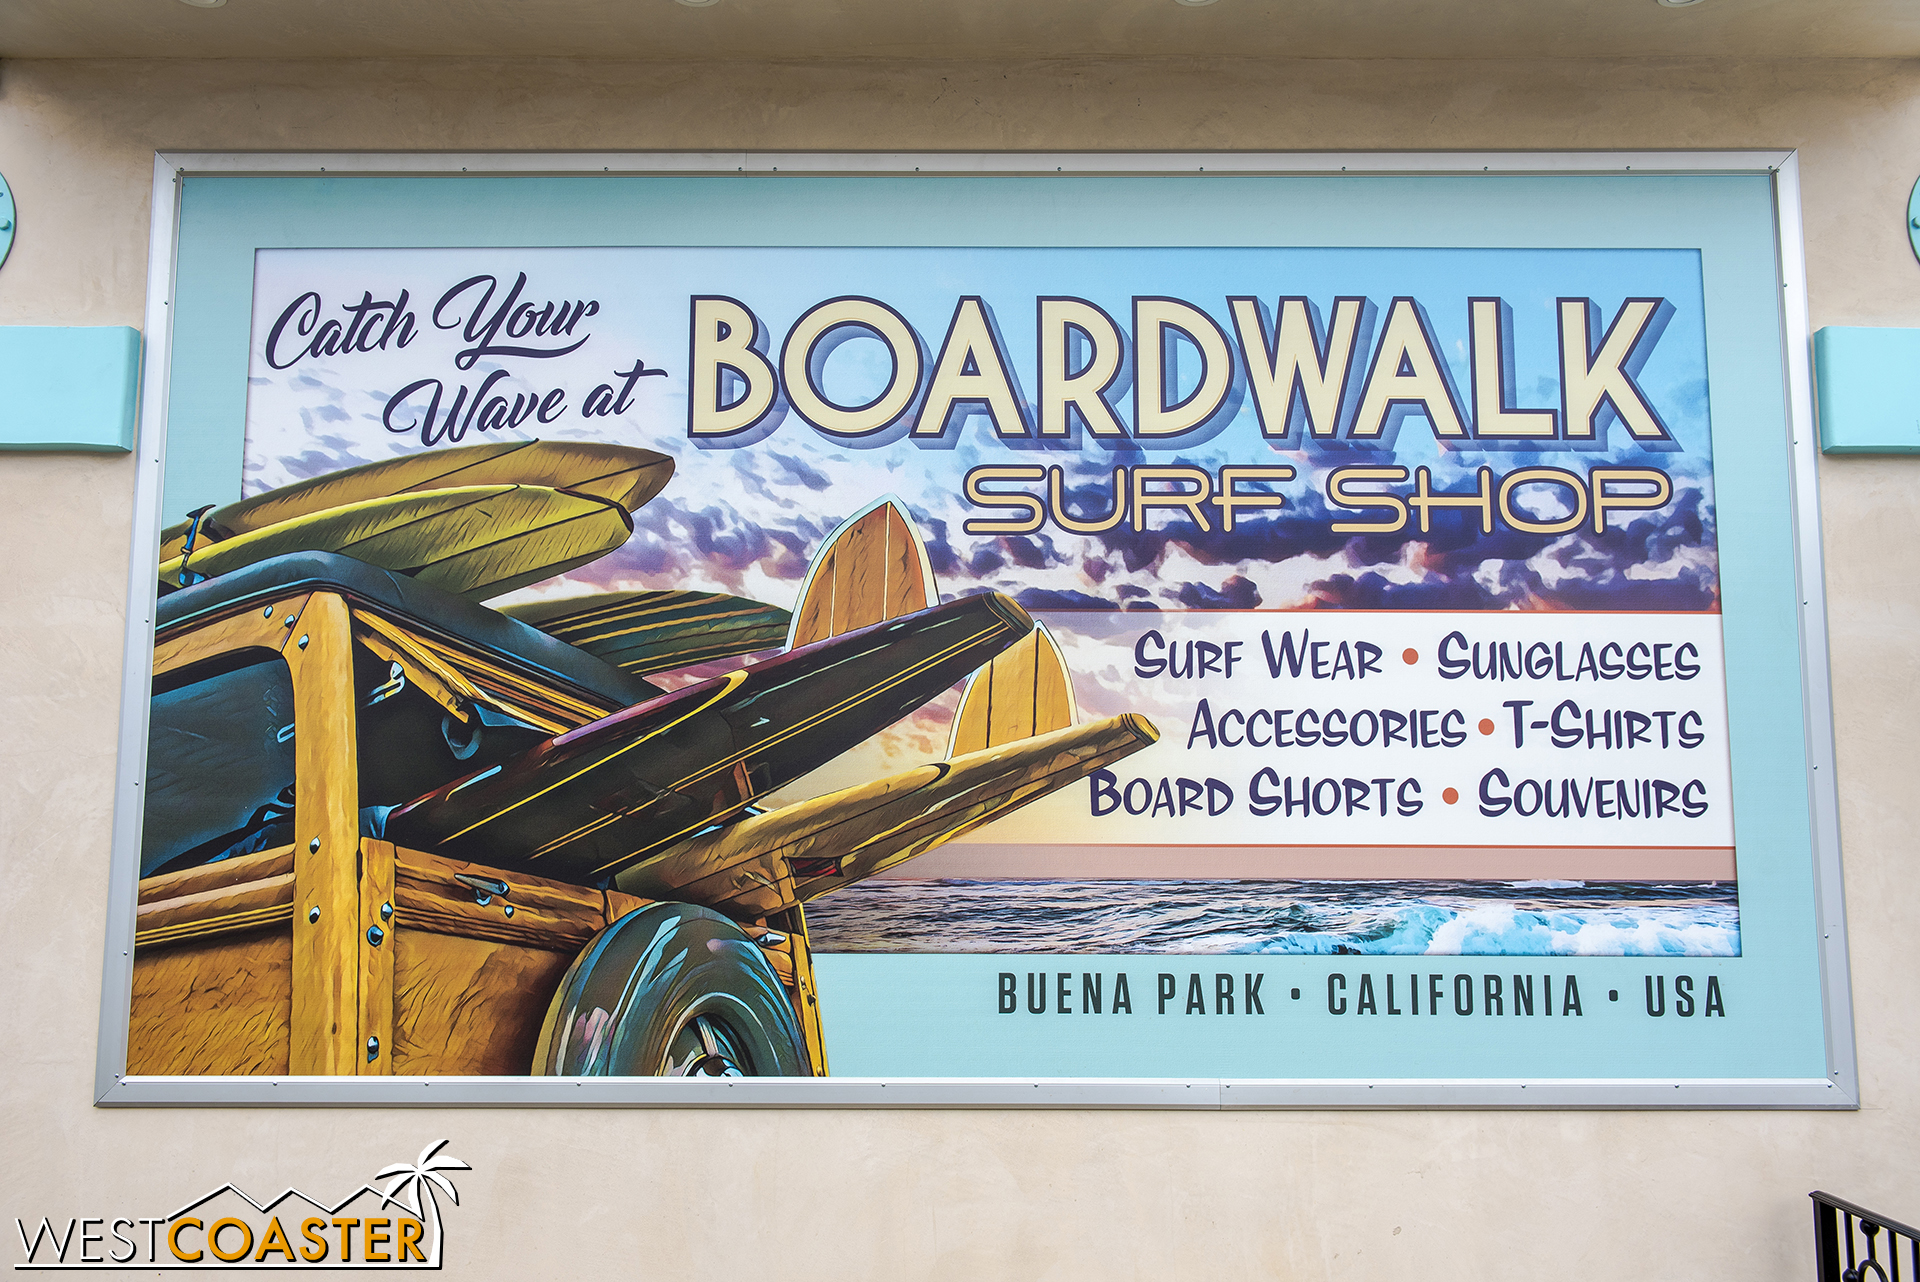  That’s a great poster mural the park has painted.  Props to the Knott’s paint and carpentry crew! 